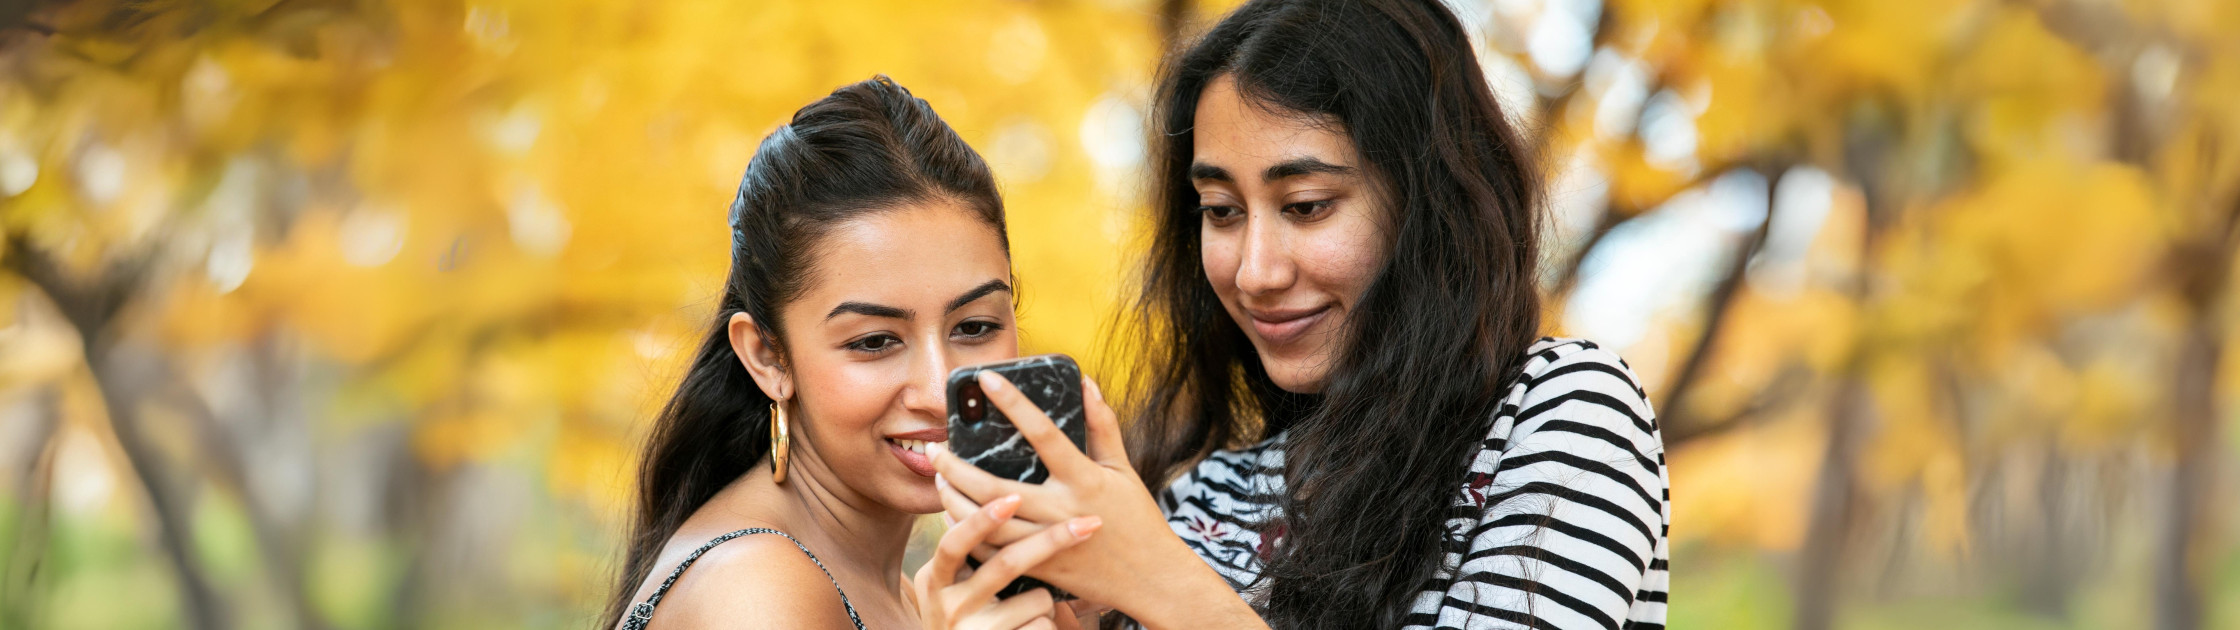 Photo of two students looking at a phone together